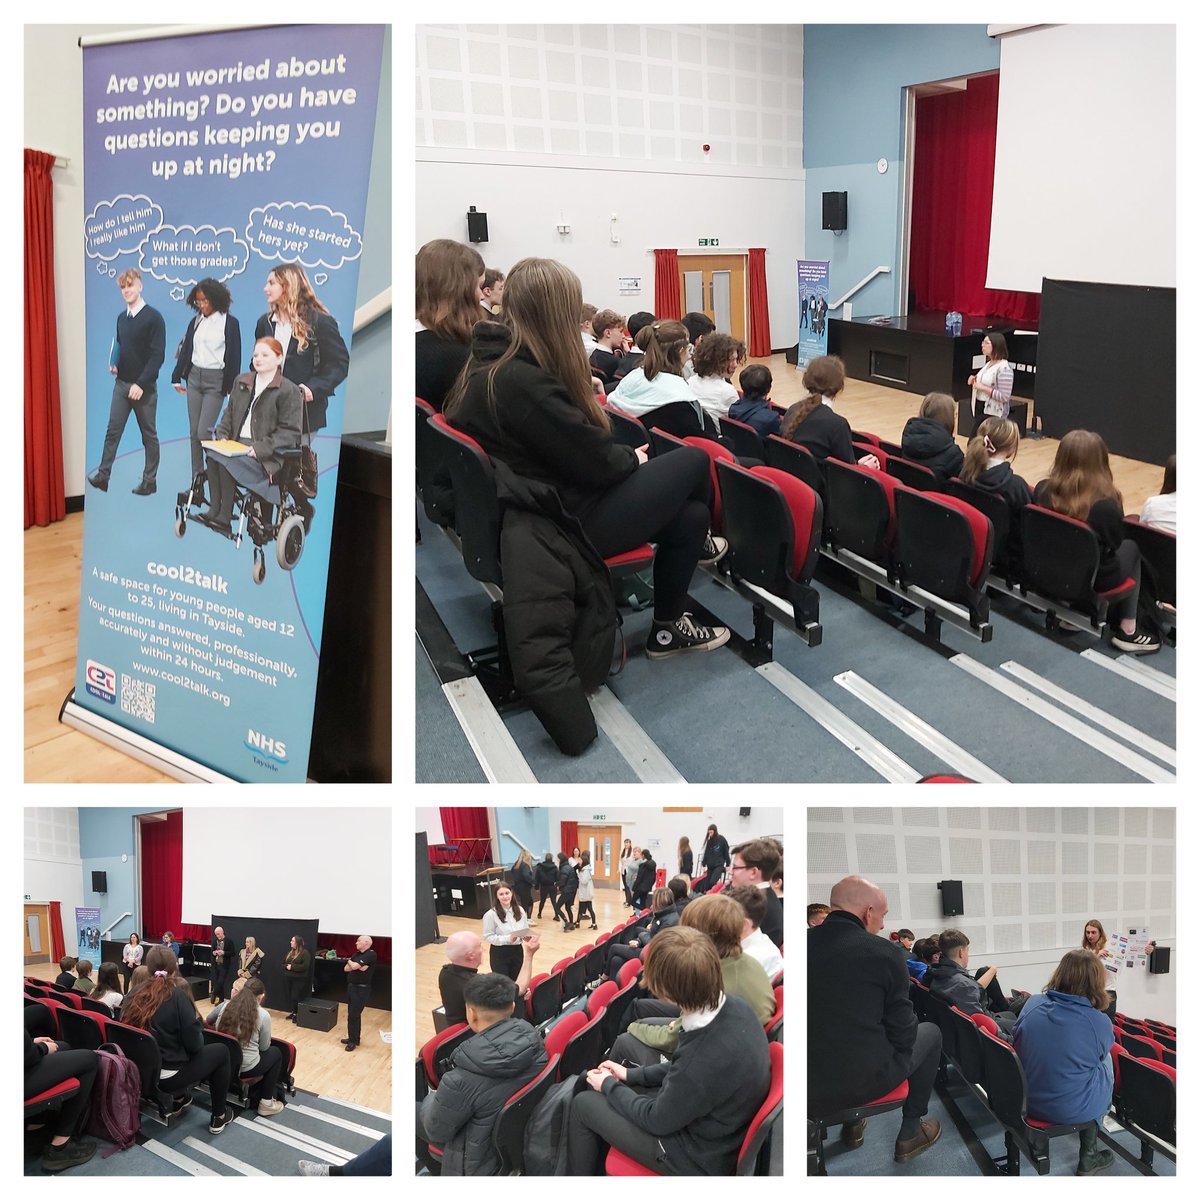 Thank you all involved in the Drama for S3s today. A fab performance and opportunity to signpost the various supports available to young people  @YouthLogos @NHSTayside @PSOSTayside @rasacpk #cool2talkour #wellbeing #s3drama